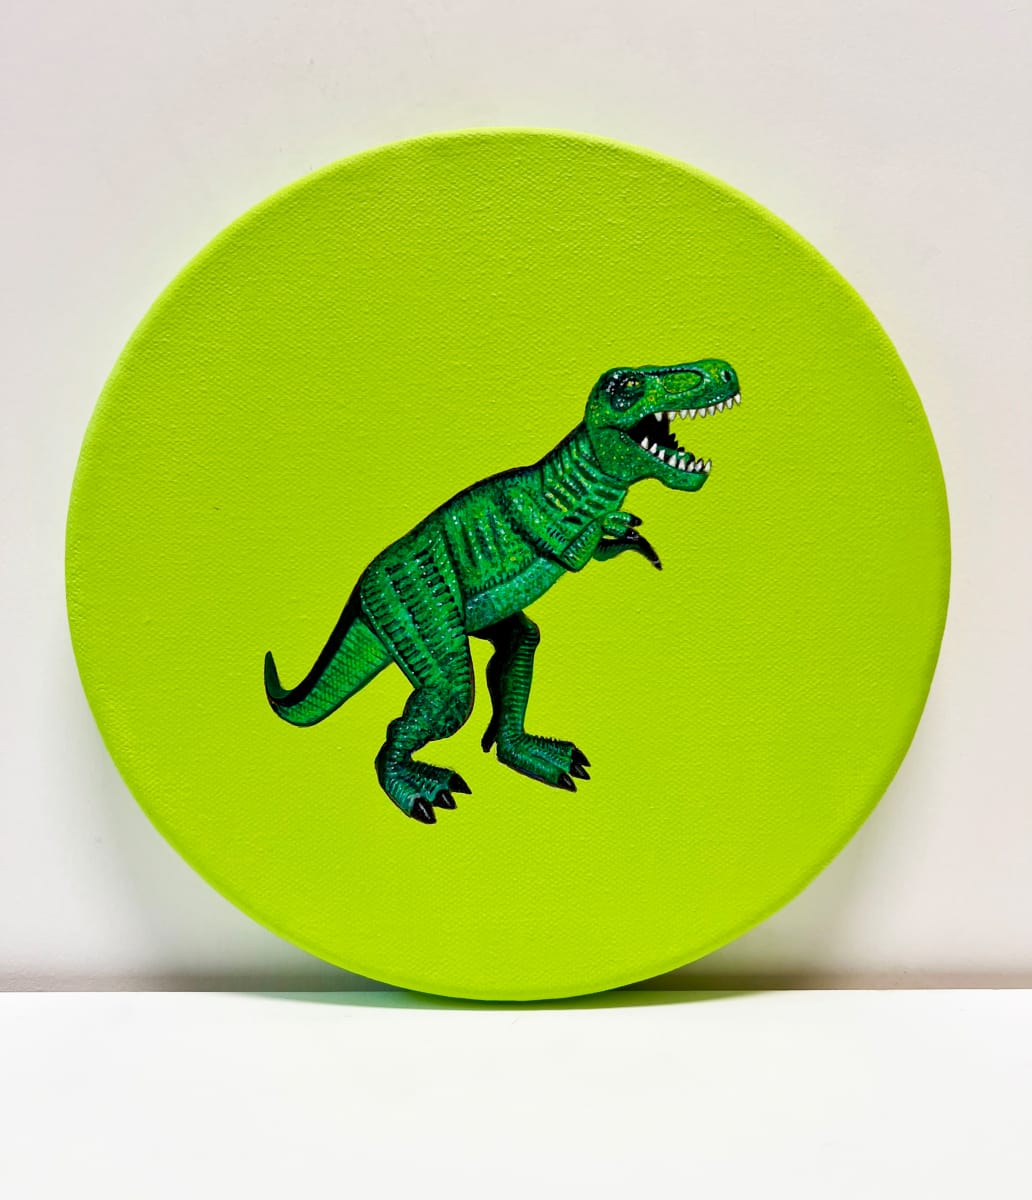 Tondo Rex - Green on Yellow Green by Colleen Critcher 